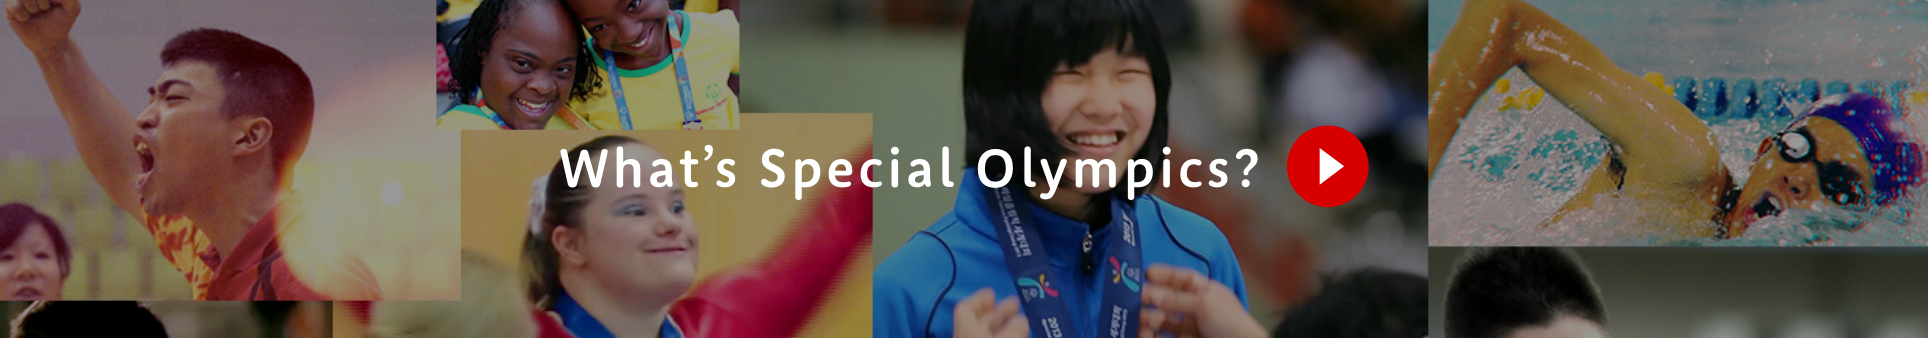 What's Special Olympics? Movie